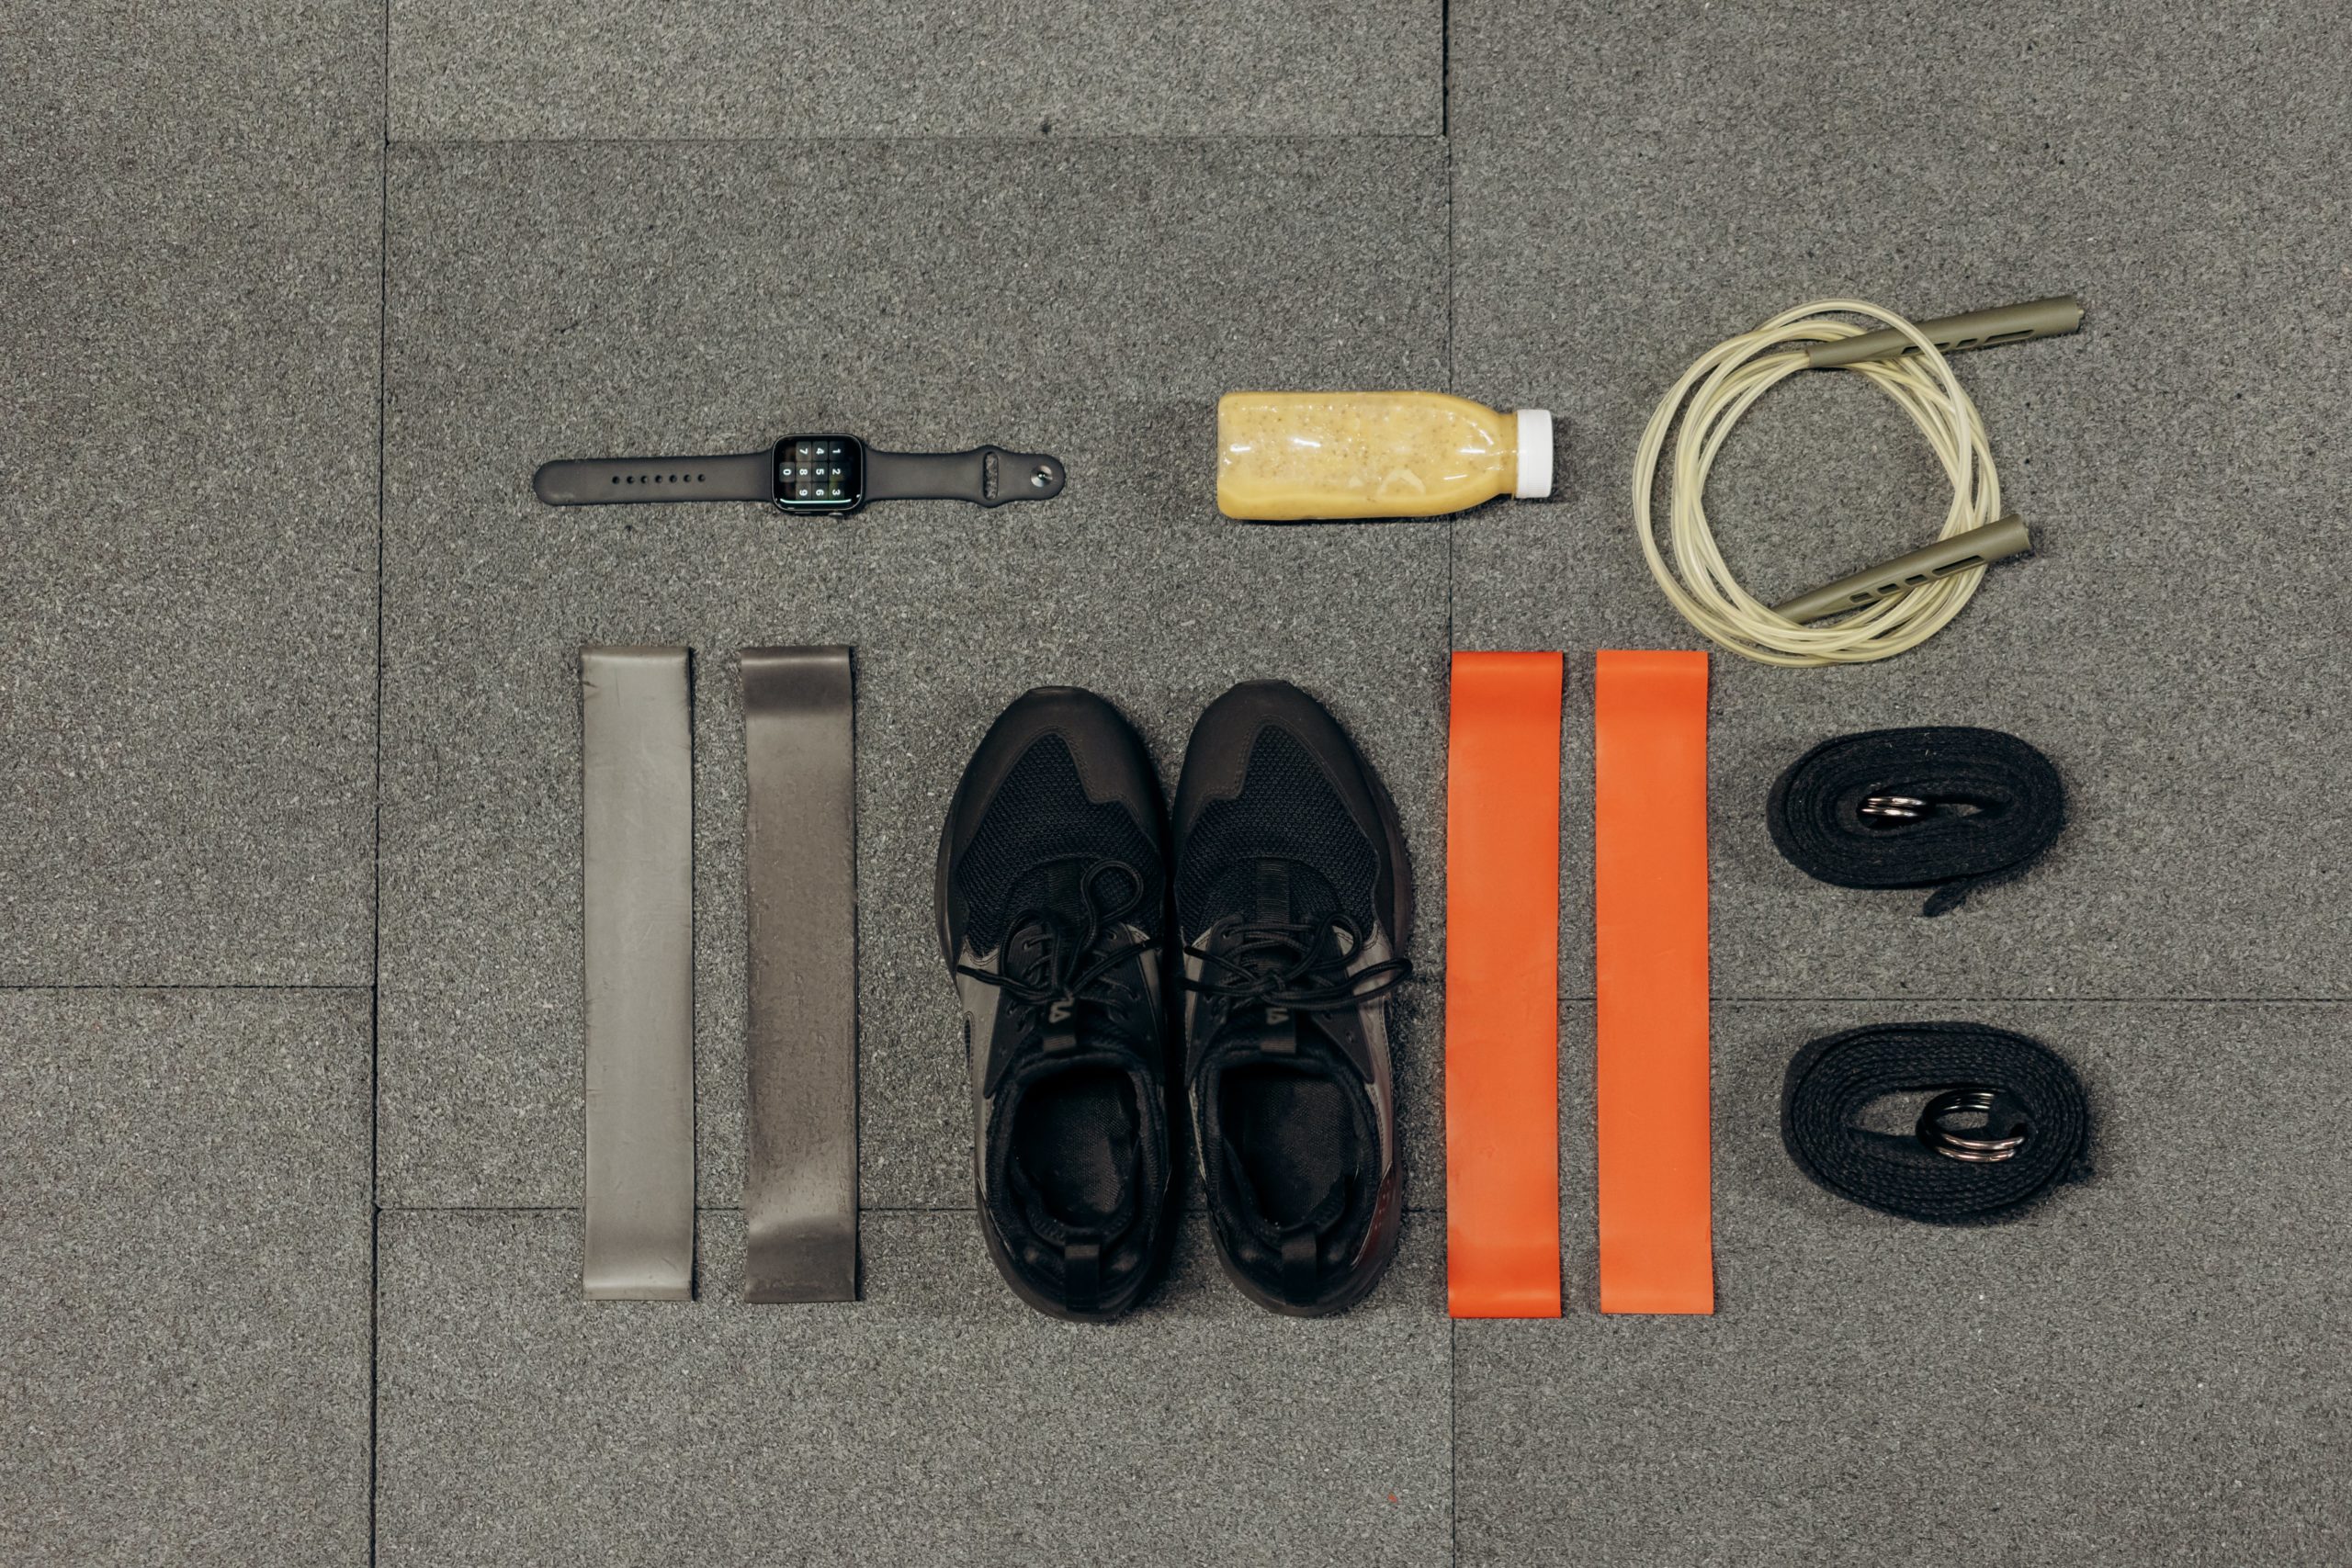 Workout tools like bands, shoes, watch, drinks, and jumping rope placed on the ground